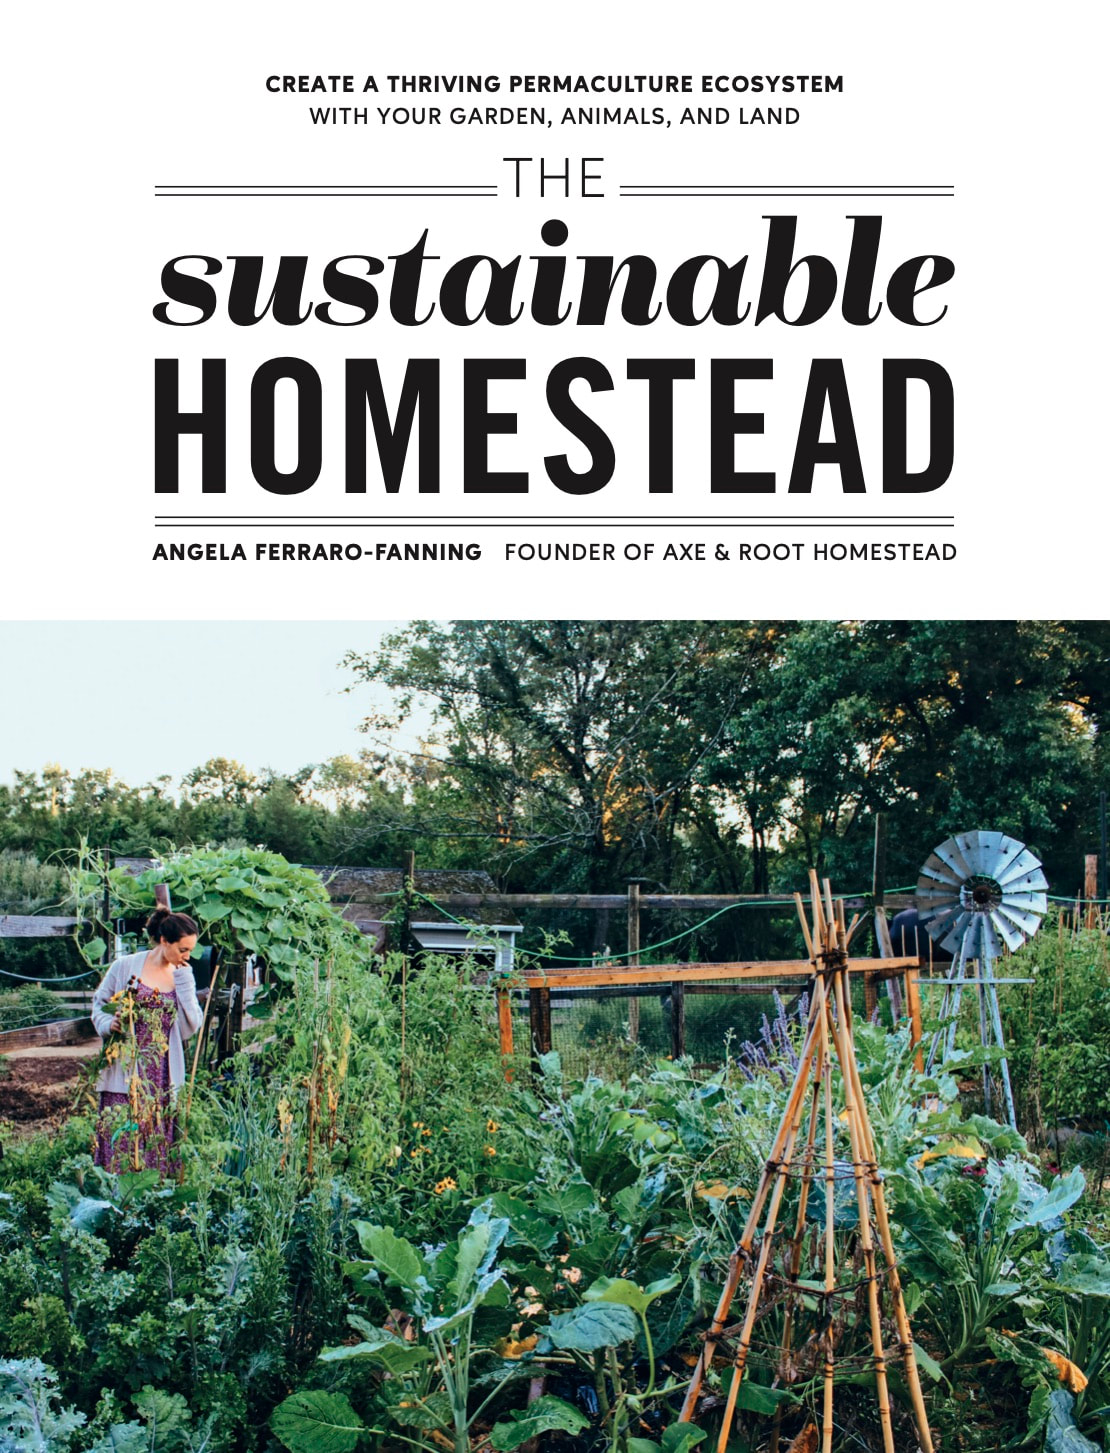 90 Practical Homesteading Essentials You Need for Self-Sufficiency - Mama  on the Homestead